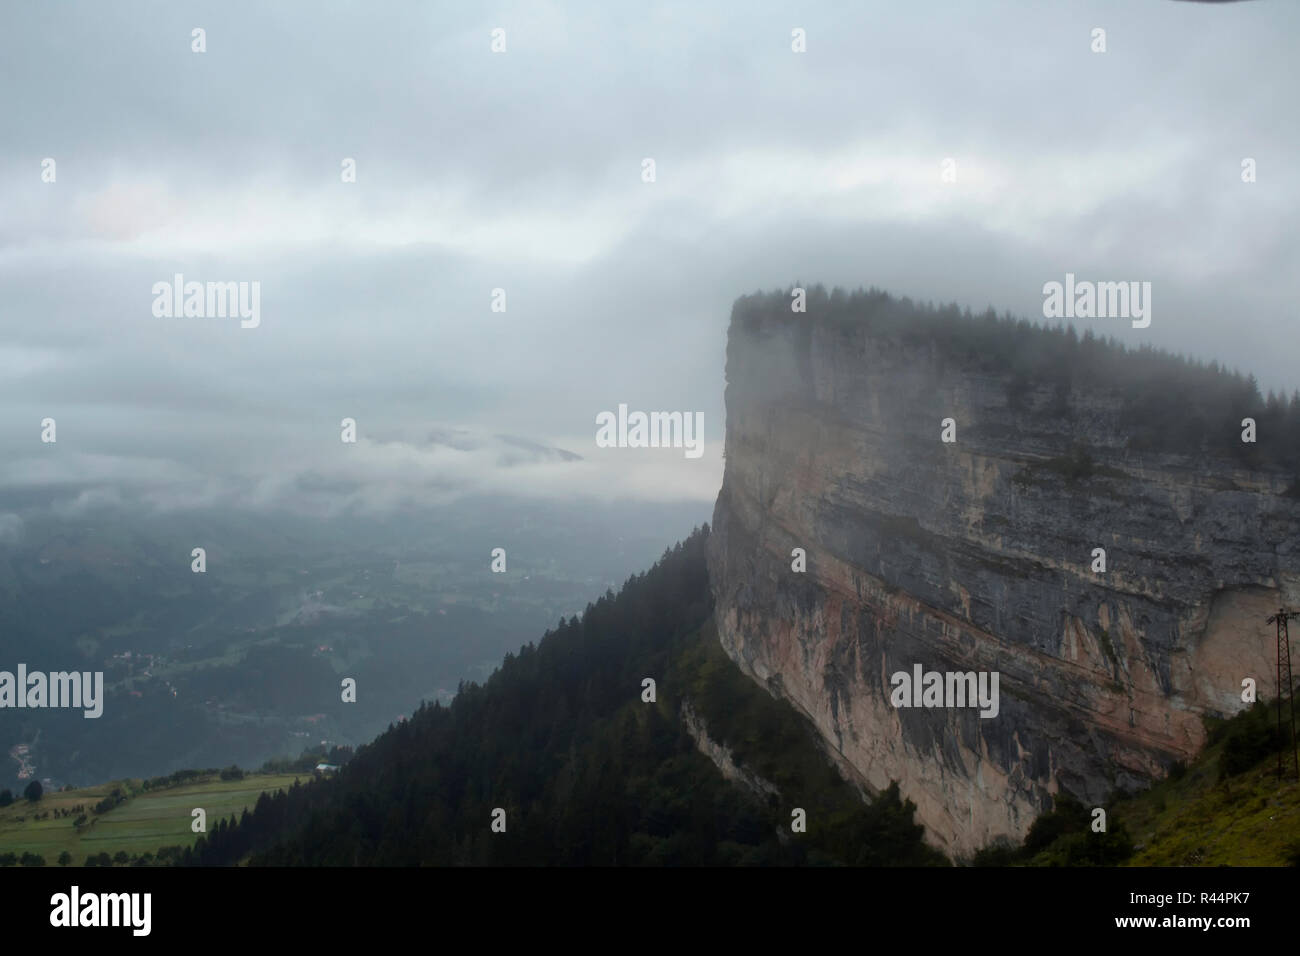 View of a big rock on top of a mountain, valley, trees and beautiful nature in fog. The image is captured in Trabzon/Rize area of Black Sea region loc Stock Photo